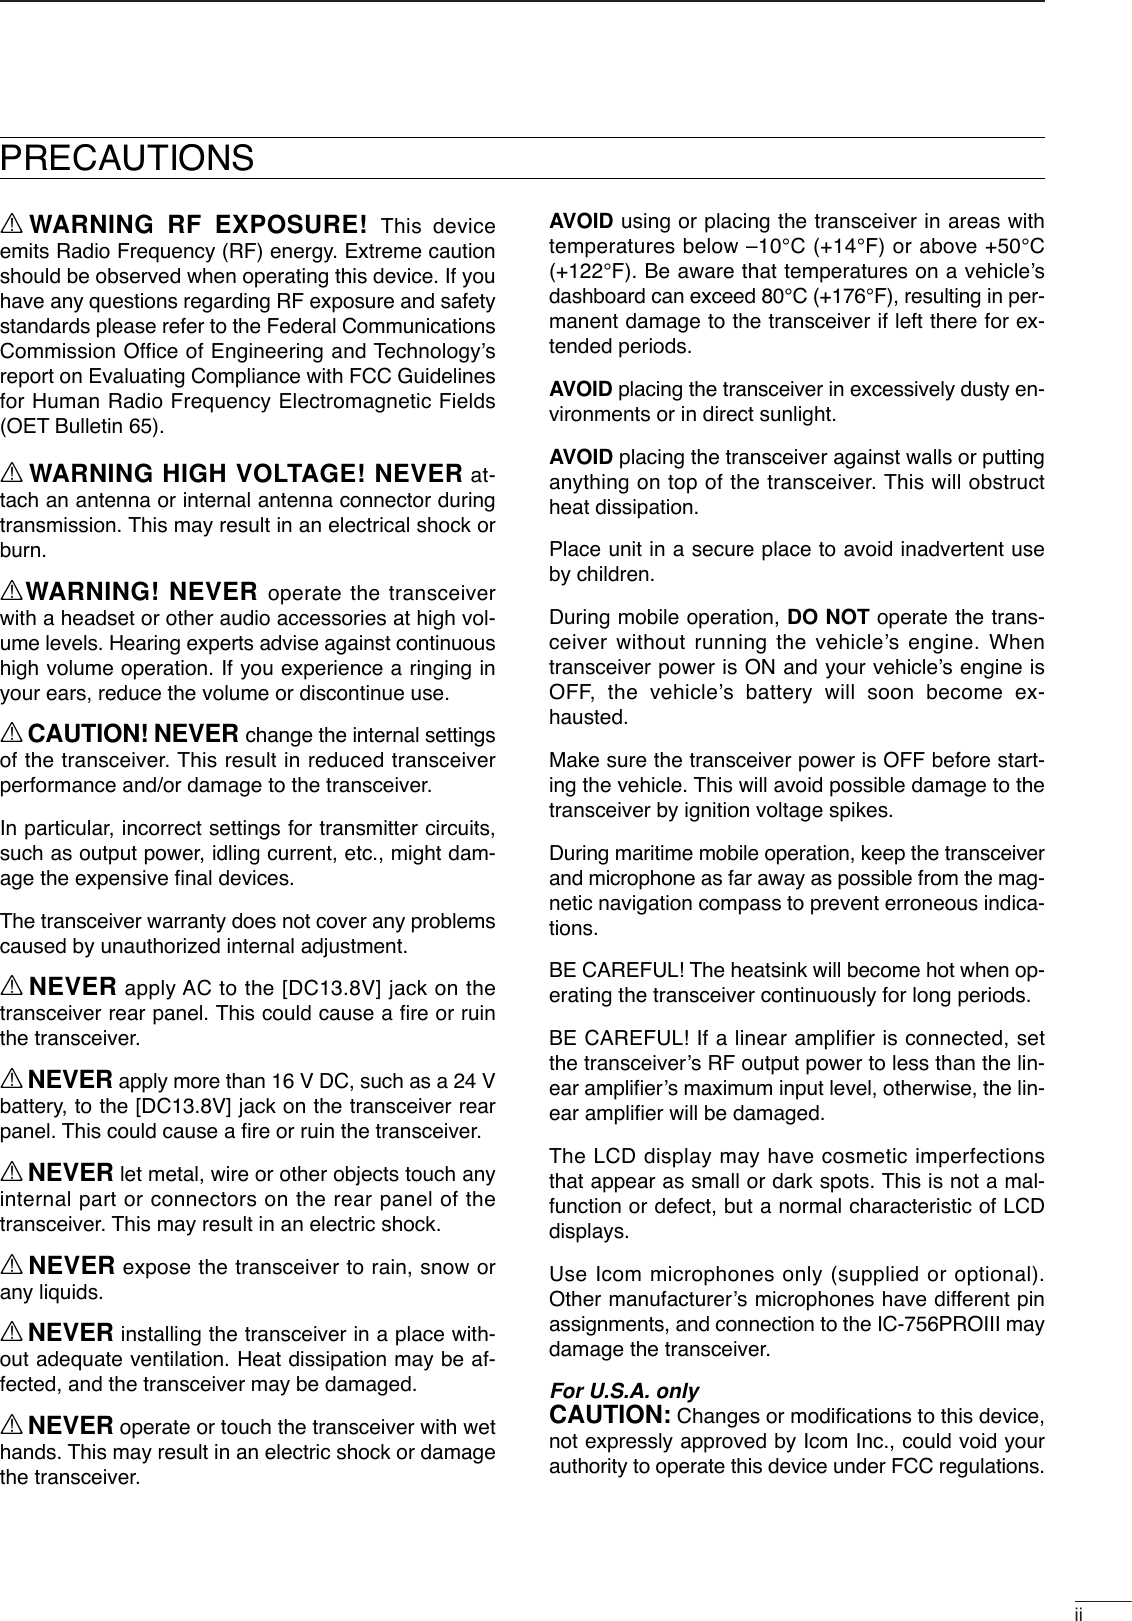 iiRWARNING RF EXPOSURE! This deviceemits Radio Frequency (RF) energy. Extreme cautionshould be observed when operating this device. If youhave any questions regarding RF exposure and safetystandards please refer to the Federal CommunicationsCommission Office of Engineering and Technology’sreport on Evaluating Compliance with FCC Guidelinesfor Human Radio Frequency Electromagnetic Fields(OET Bulletin 65).RWARNING HIGH VOLTAGE! NEVER at-tach an antenna or internal antenna connector duringtransmission. This may result in an electrical shock orburn.RWARNING! NEVER operate the transceiverwith a headset or other audio accessories at high vol-ume levels. Hearing experts advise against continuoushigh volume operation. If you experience a ringing inyour ears, reduce the volume or discontinue use.RCAUTION! NEVER change the internal settingsof the transceiver. This result in reduced transceiverperformance and/or damage to the transceiver.In particular, incorrect settings for transmitter circuits,such as output power, idling current, etc., might dam-age the expensive ﬁnal devices.The transceiver warranty does not cover any problemscaused by unauthorized internal adjustment.RNEVER apply AC to the [DC13.8V] jack on thetransceiver rear panel. This could cause a ﬁre or ruinthe transceiver.RNEVER apply more than 16 V DC, such as a 24 Vbattery, to the [DC13.8V] jack on the transceiver rearpanel. This could cause a ﬁre or ruin the transceiver.RNEVER let metal, wire or other objects touch anyinternal part or connectors on the rear panel of thetransceiver. This may result in an electric shock.RNEVER expose the transceiver to rain, snow orany liquids.RNEVER installing the transceiver in a place with-out adequate ventilation. Heat dissipation may be af-fected, and the transceiver may be damaged.RNEVER operate or touch the transceiver with wethands. This may result in an electric shock or damagethe transceiver.AVOID using or placing the transceiver in areas withtemperatures below –10°C (+14°F) or above +50°C(+122°F). Be aware that temperatures on a vehicle’sdashboard can exceed 80°C (+176°F), resulting in per-manent damage to the transceiver if left there for ex-tended periods.AVOID placing the transceiver in excessively dusty en-vironments or in direct sunlight.AVOID placing the transceiver against walls or puttinganything on top of the transceiver. This will obstructheat dissipation.Place unit in a secure place to avoid inadvertent useby children.During mobile operation, DO NOT operate the trans-ceiver without running the vehicle’s engine. Whentransceiver power is ON and your vehicle’s engine isOFF, the vehicle’s battery will soon become ex-hausted.Make sure the transceiver power is OFF before start-ing the vehicle. This will avoid possible damage to thetransceiver by ignition voltage spikes.During maritime mobile operation, keep the transceiverand microphone as far away as possible from the mag-netic navigation compass to prevent erroneous indica-tions.BE CAREFUL! The heatsink will become hot when op-erating the transceiver continuously for long periods.BE CAREFUL! If a linear amplifier is connected, setthe transceiver’s RF output power to less than the lin-ear ampliﬁer’s maximum input level, otherwise, the lin-ear ampliﬁer will be damaged.The LCD display may have cosmetic imperfectionsthat appear as small or dark spots. This is not a mal-function or defect, but a normal characteristic of LCDdisplays.Use Icom microphones only (supplied or optional).Other manufacturer’s microphones have different pinassignments, and connection to the IC-756PROIII maydamage the transceiver.For U.S.A. onlyCAUTION: Changes or modiﬁcations to this device,not expressly approved by Icom Inc., could void yourauthority to operate this device under FCC regulations.PRECAUTIONS